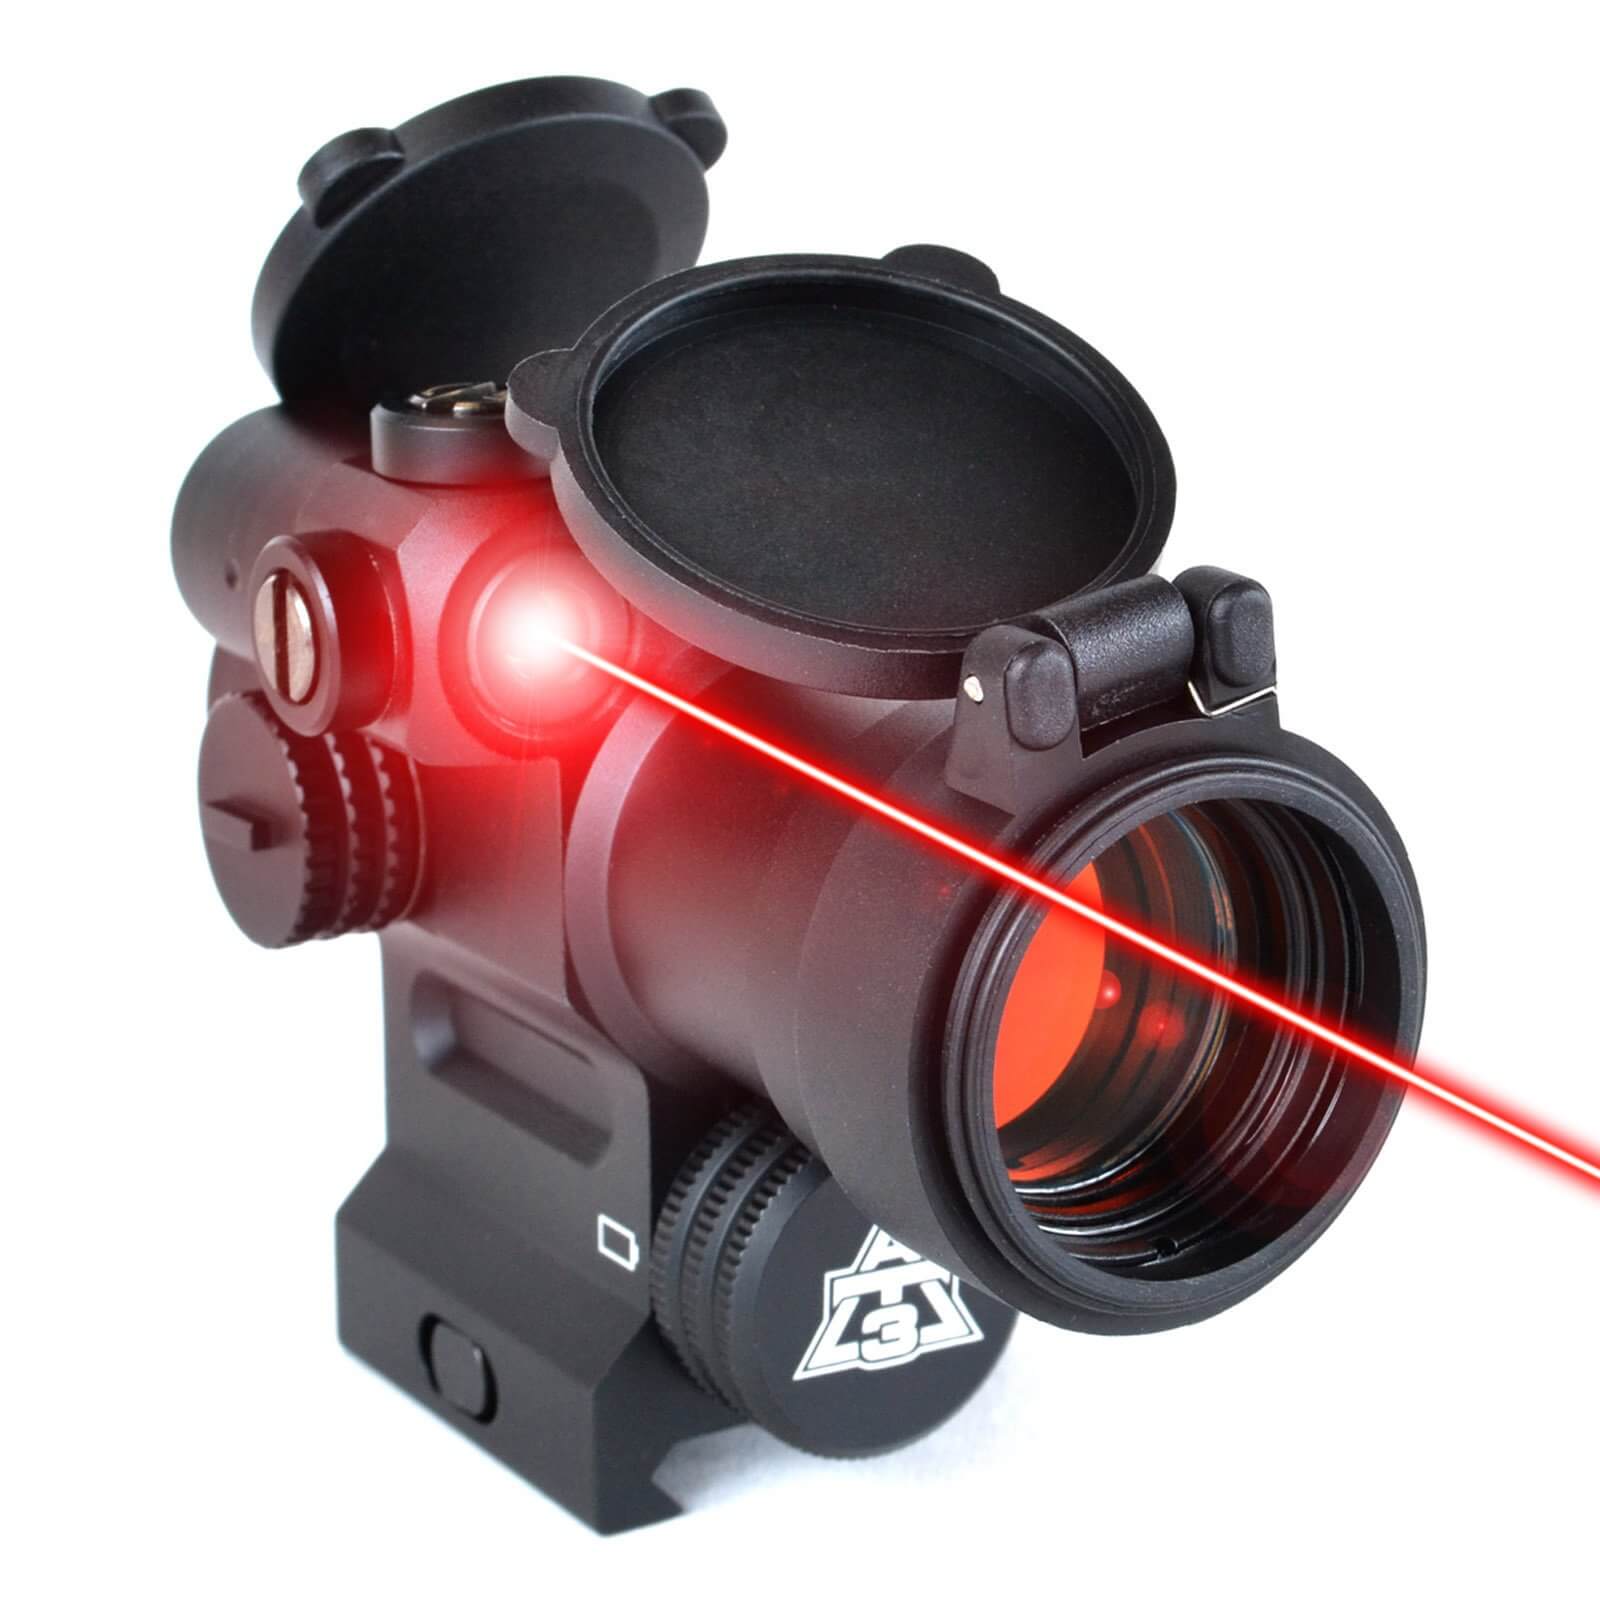 AT3™ Magnified AR-15 Red Dot with Laser Sight Kit | LEOS and RRDM